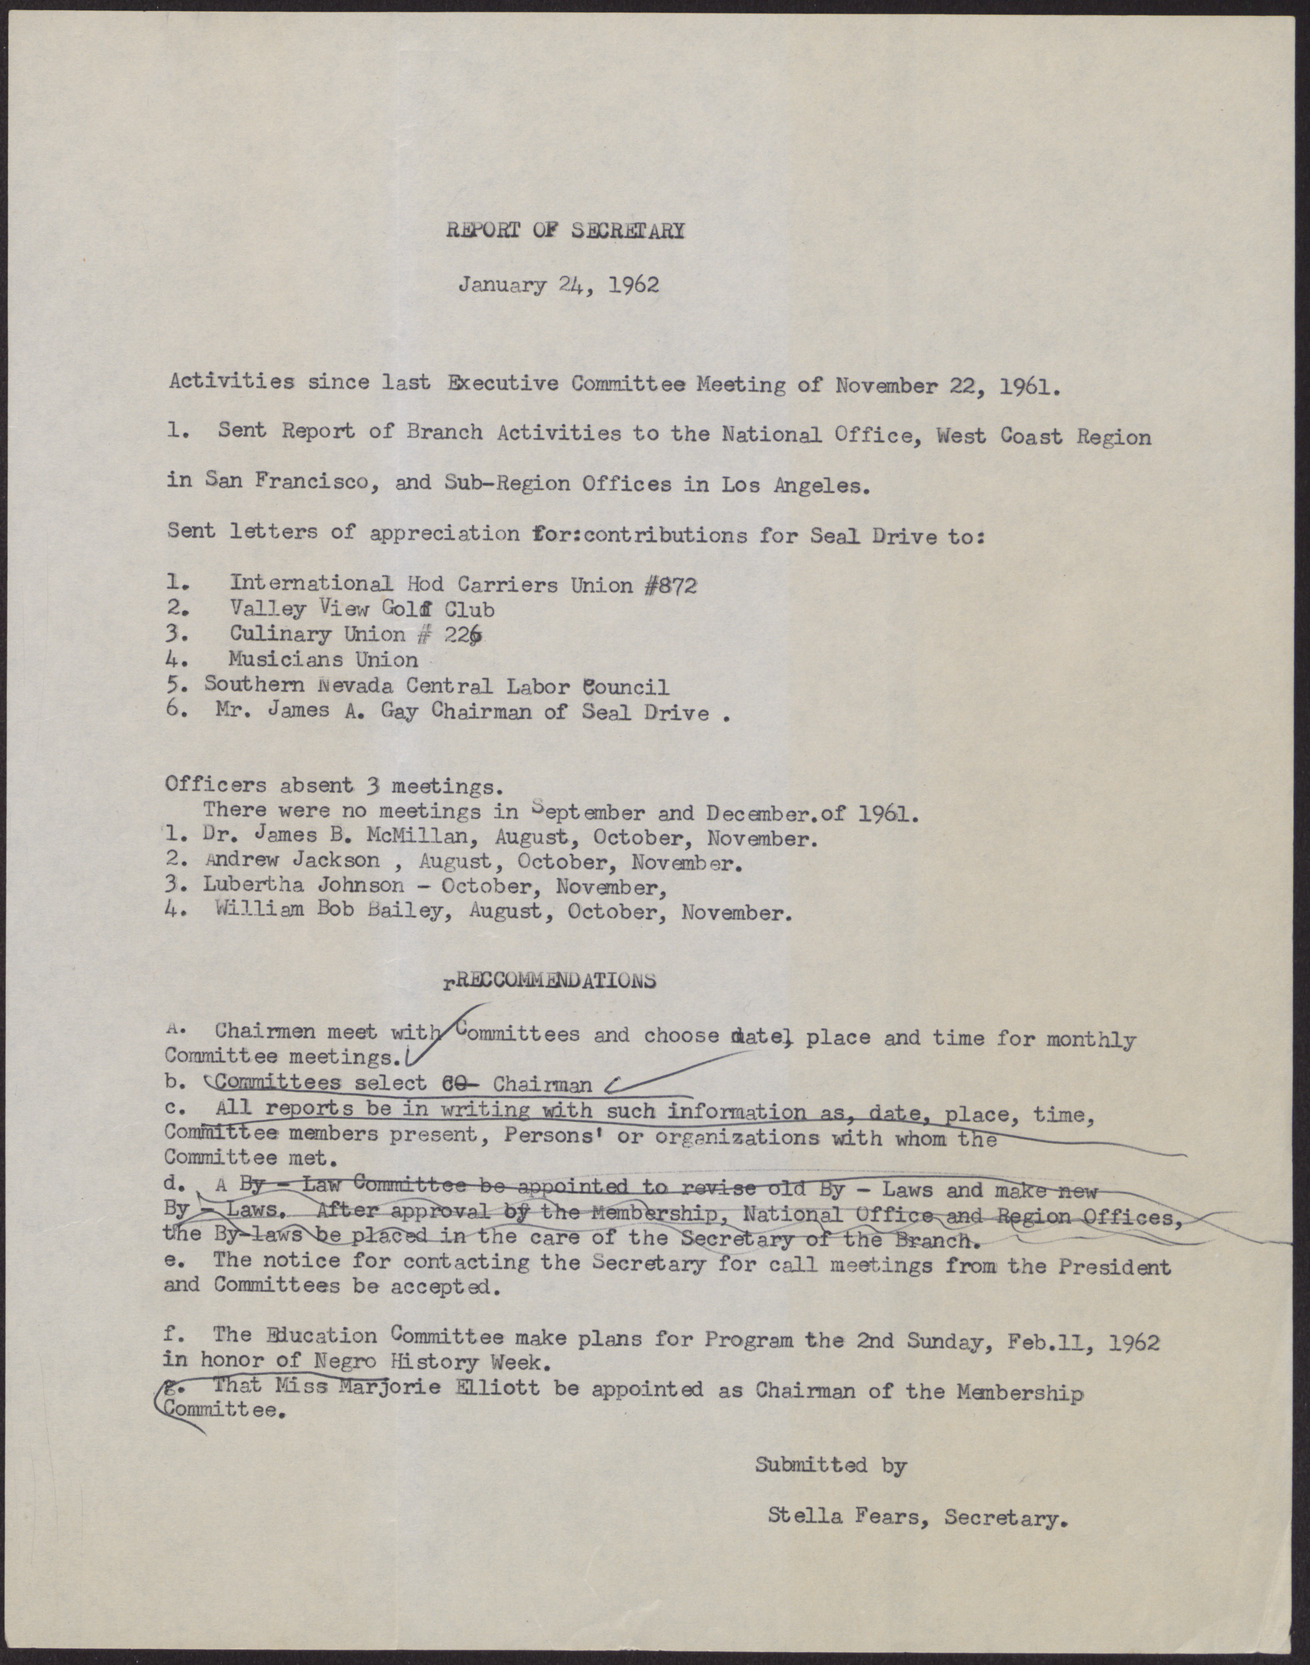 Report of Secretary submitted by Stella Fears, January 24, 1962